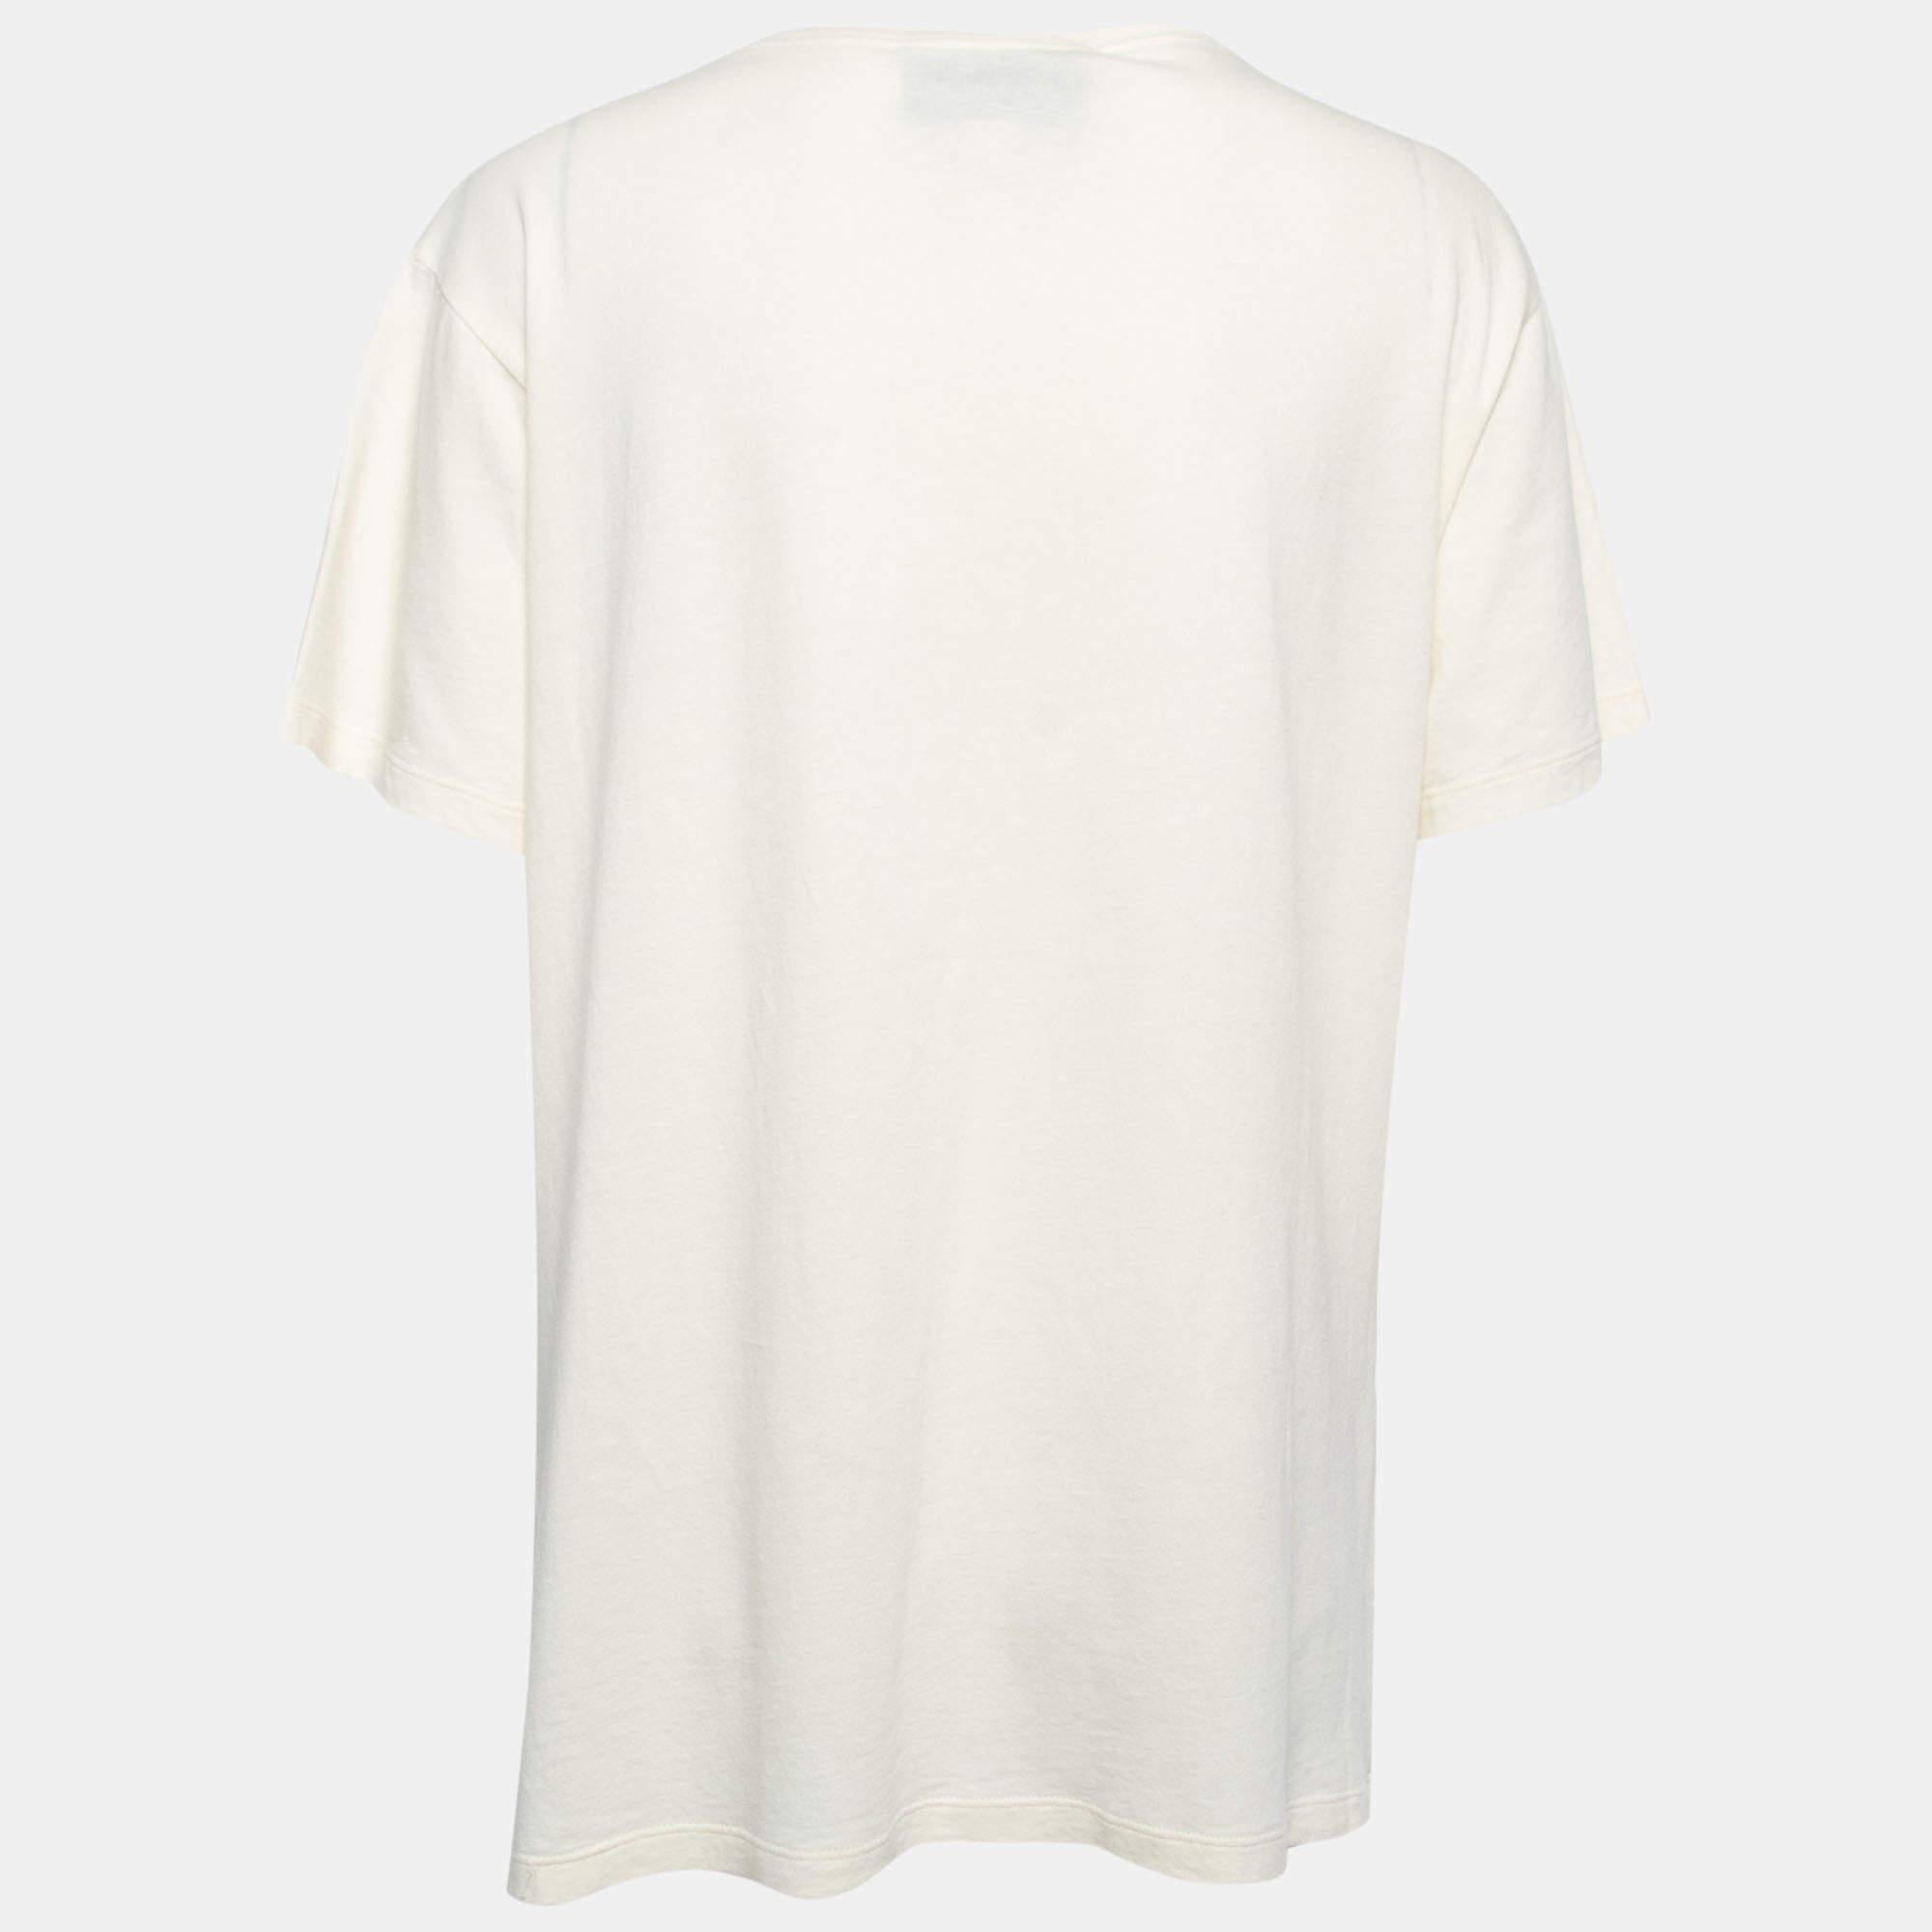 Gucci gives a stylish spin to the simple round-neck T-shirt with this piece. It is made of cotton in a short-sleeve design, and the look is elevated with sequins.

